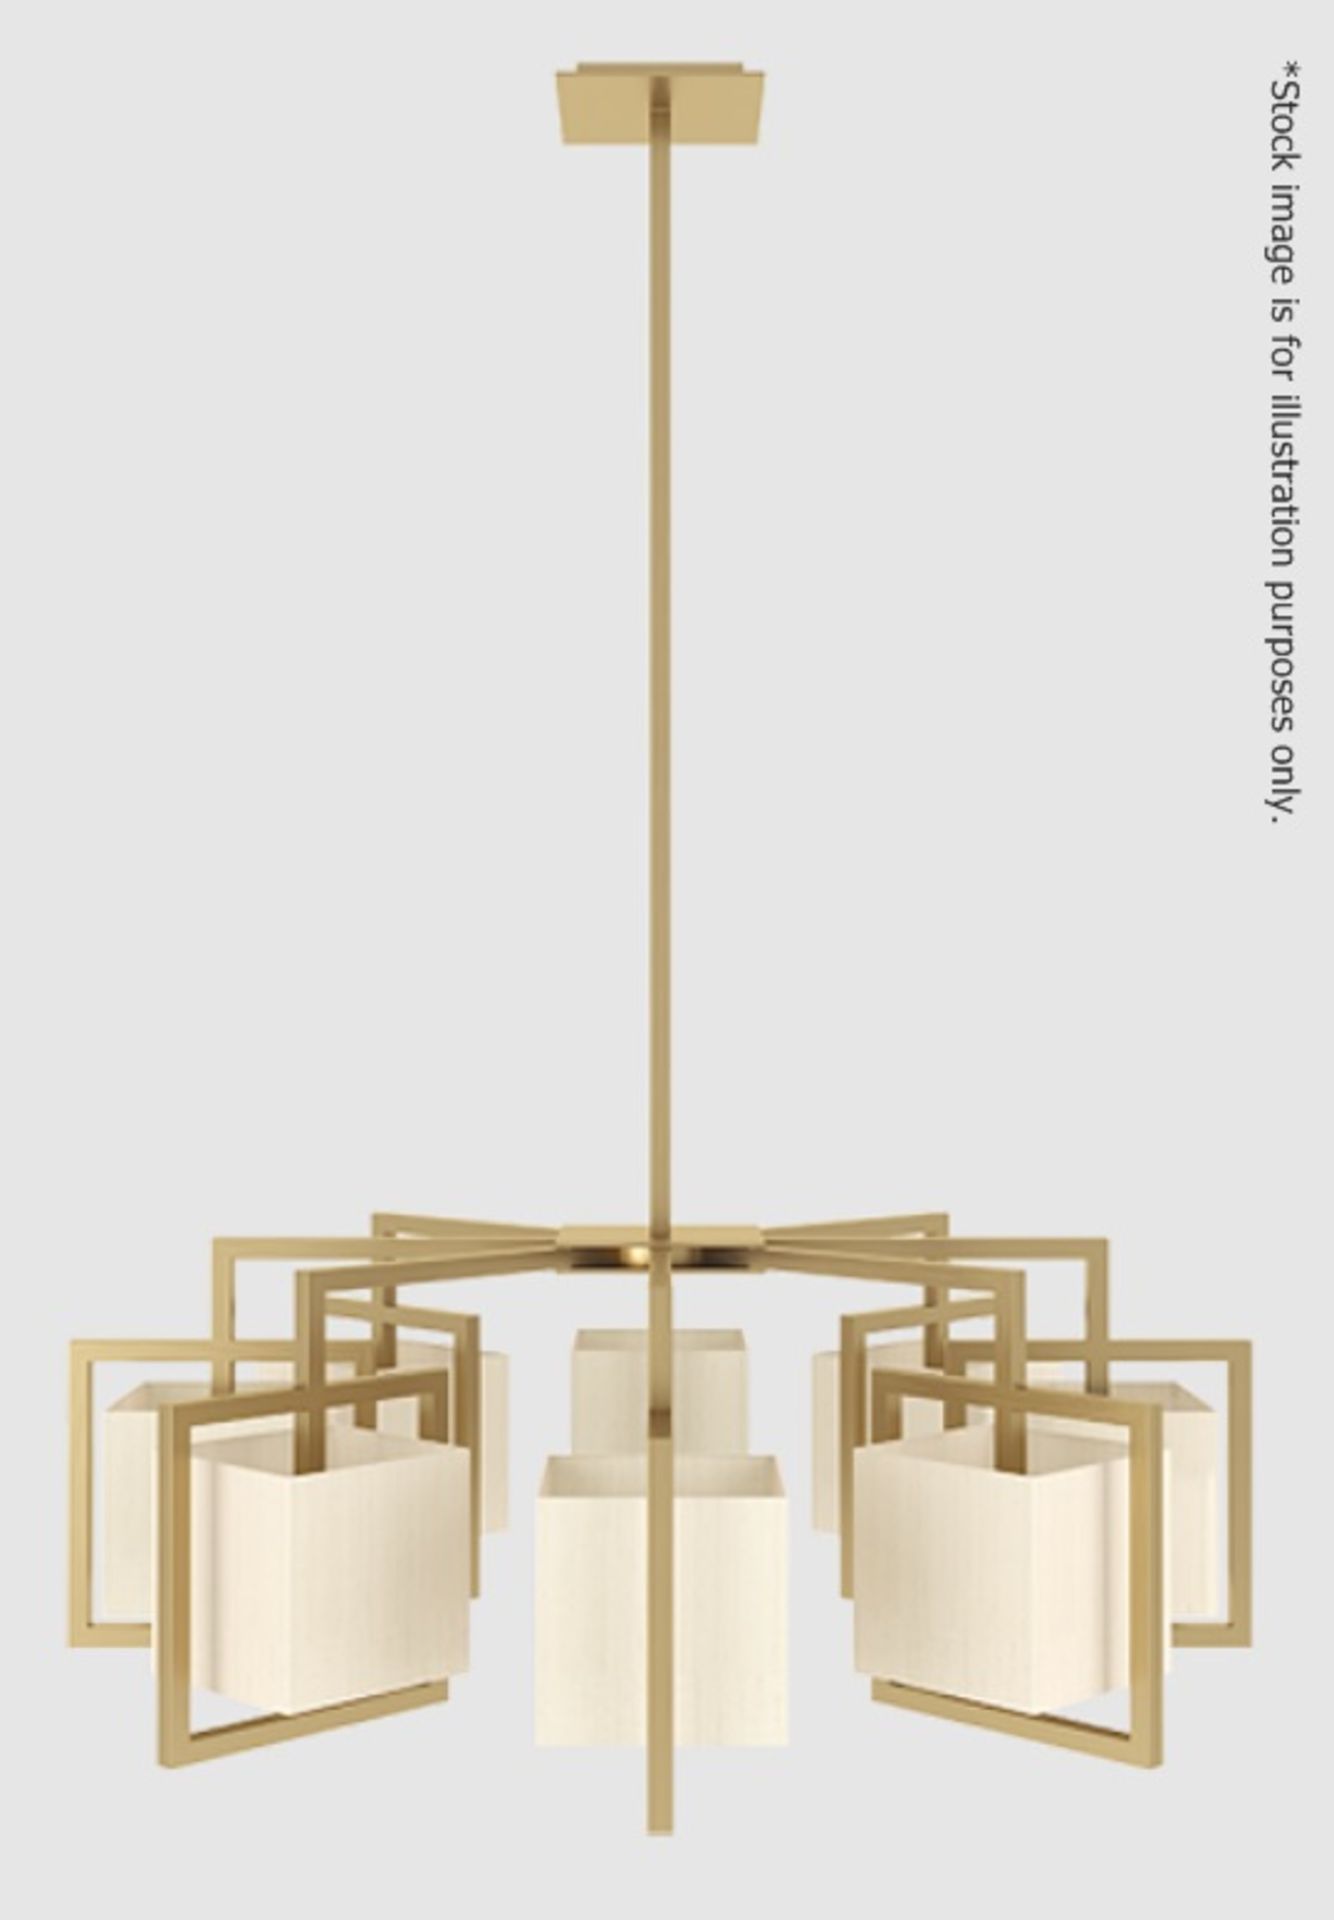 1 x FRATO 'DOMAIN' Designer 8-Light Ceiling Chandelier With Cubed Shades In Pulled-Silk - - Image 2 of 11